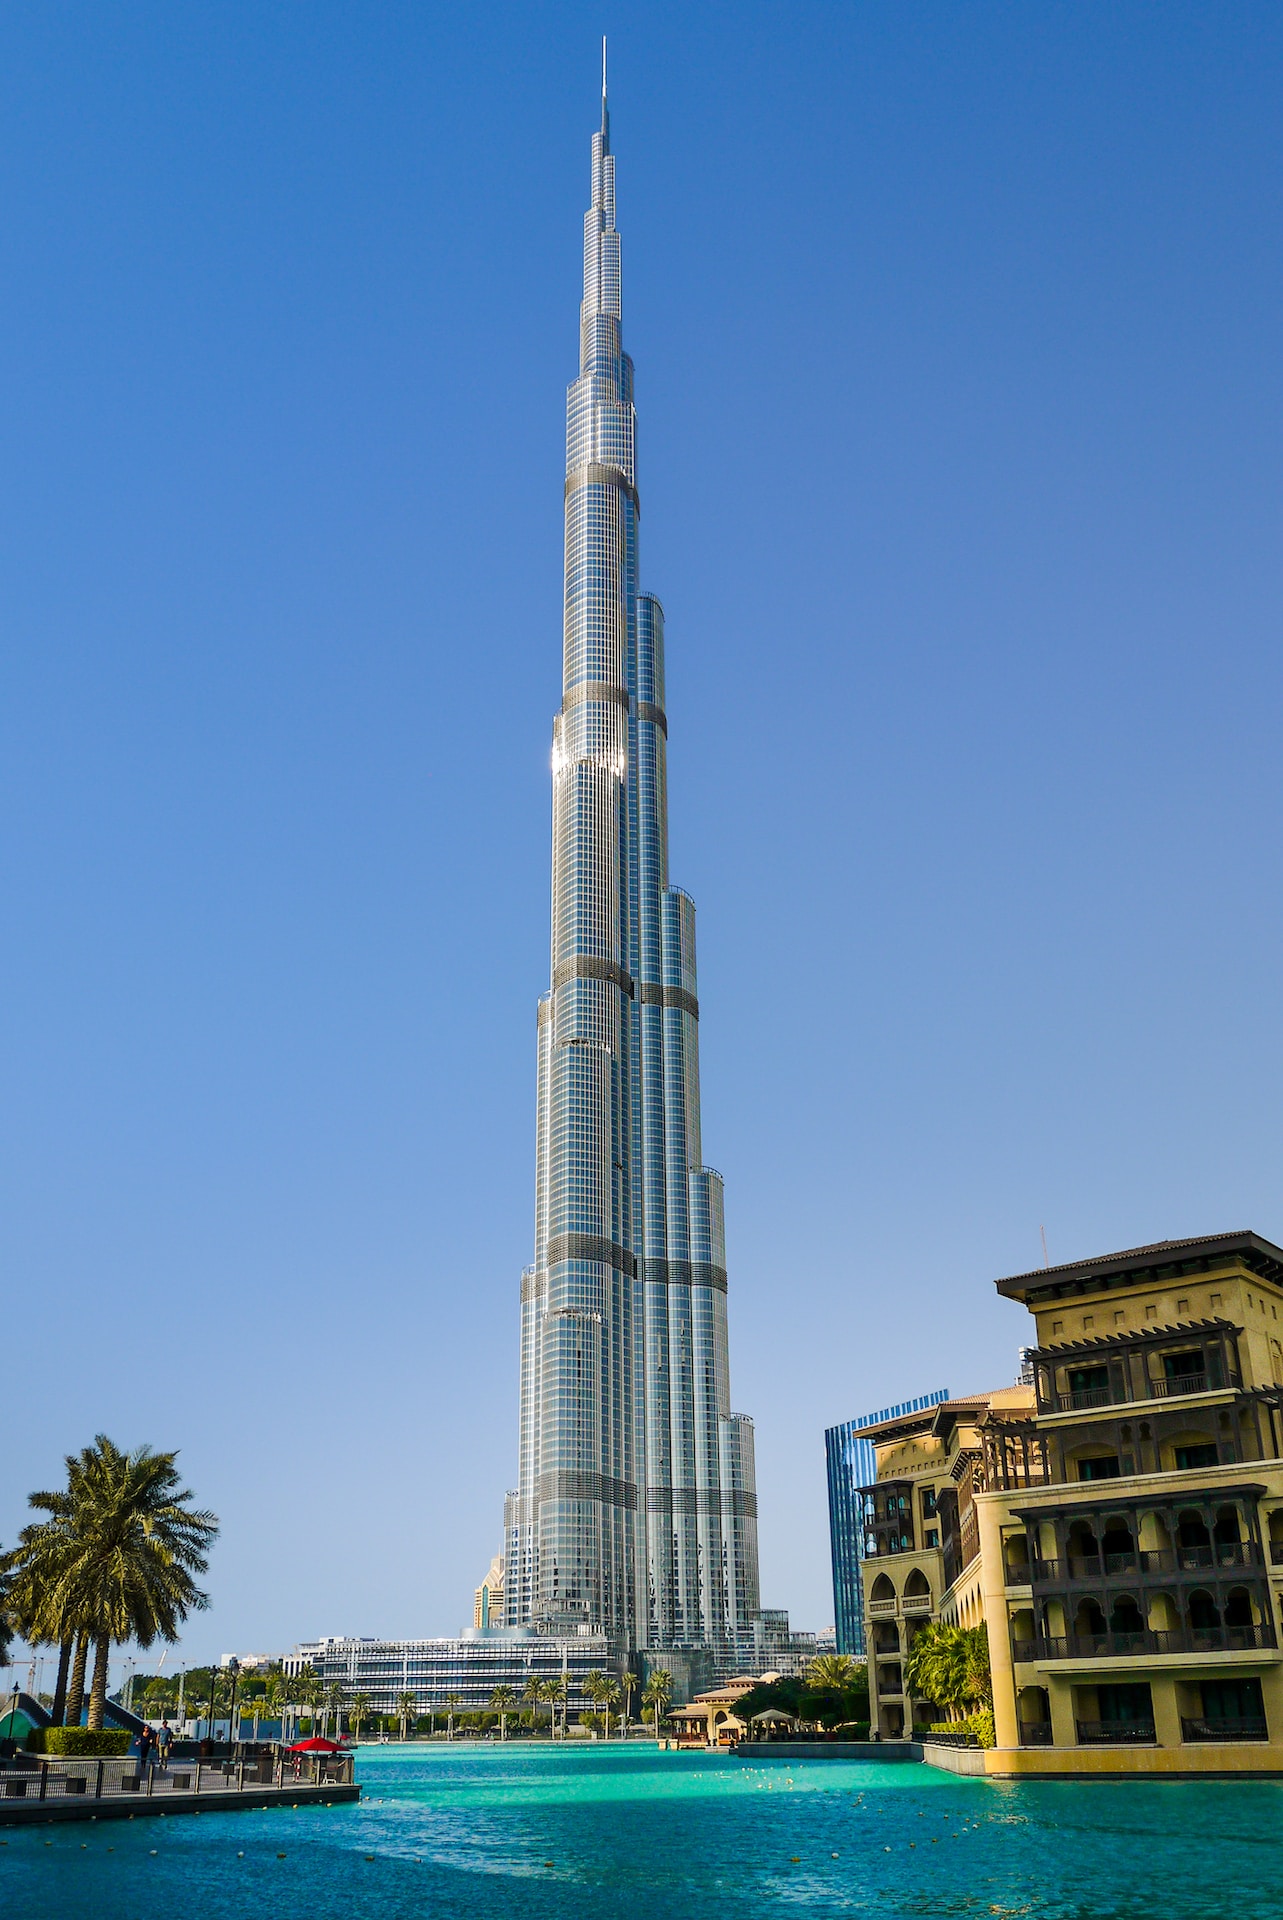 Who is the Indian owner of the Burj Khalifa flat?